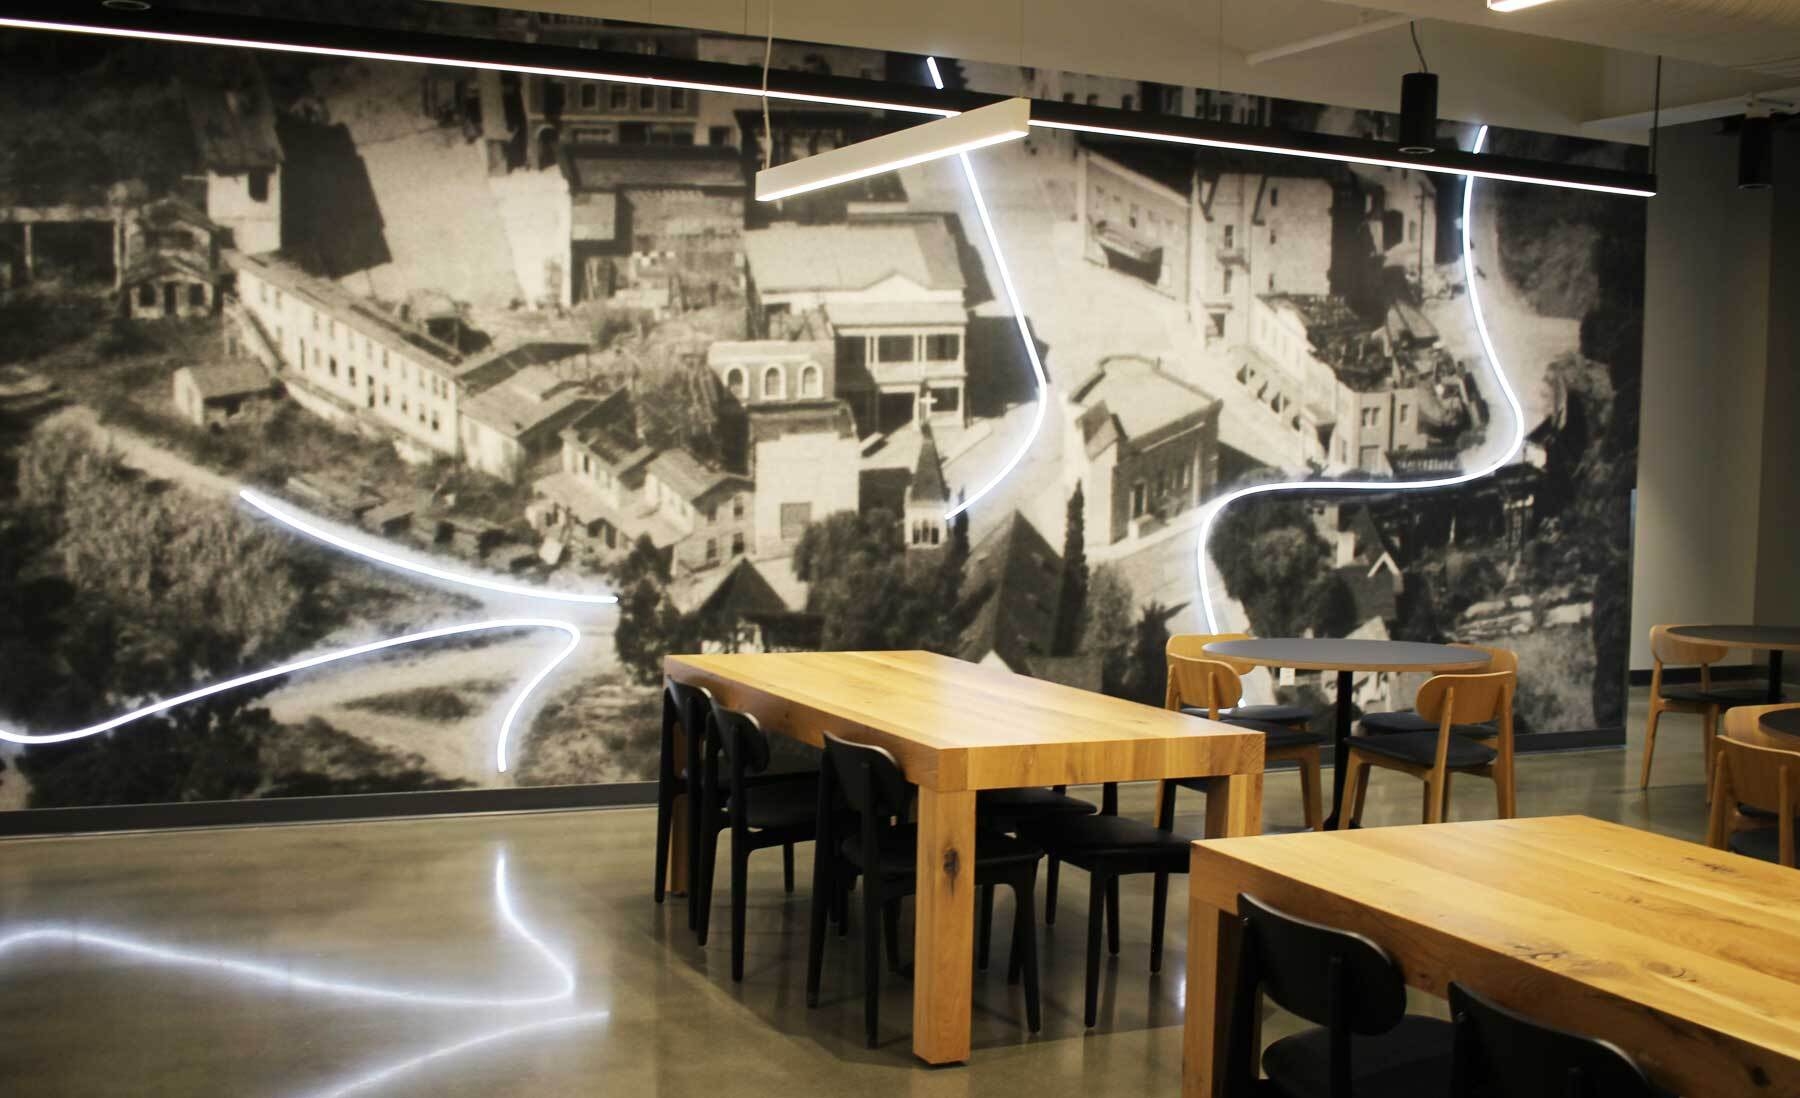 An image of a lunch room with a big mural on the wall. The mural features roads in Culver City with lights along the roads.